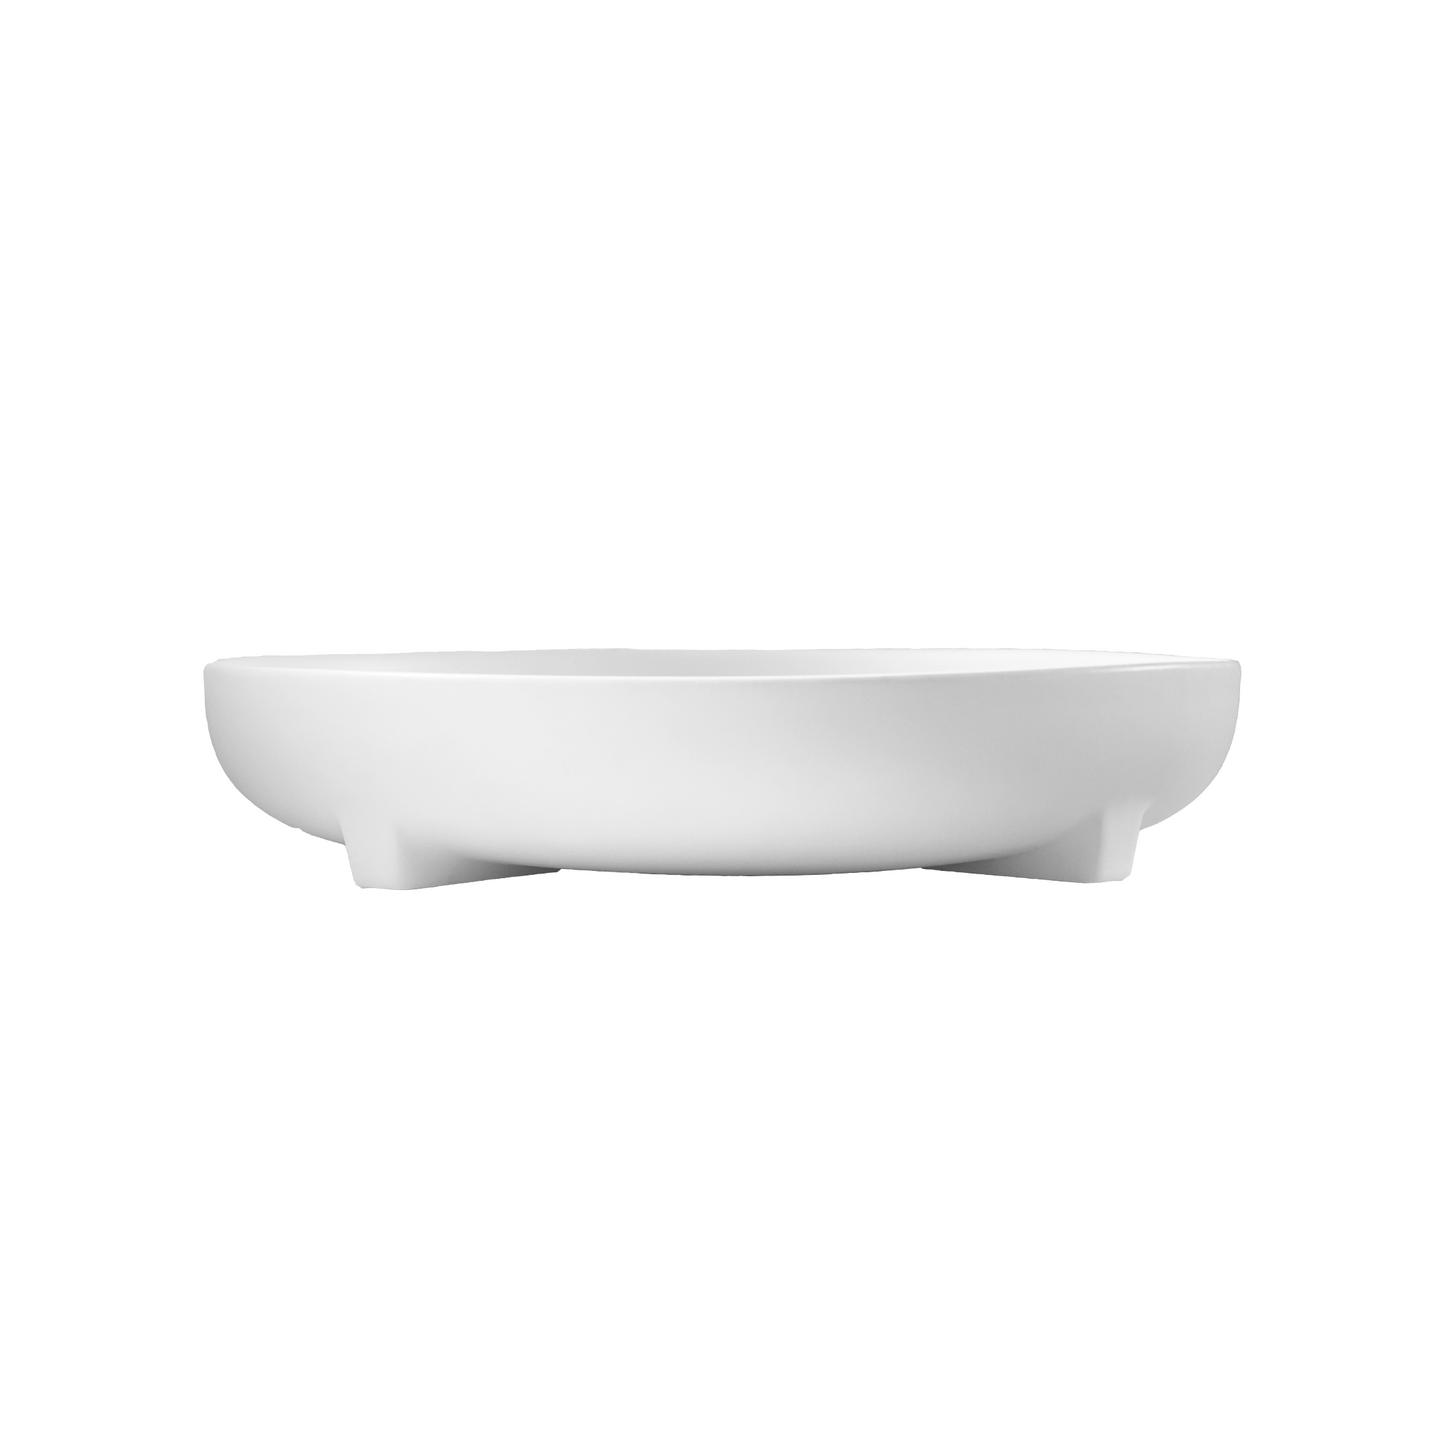 Plus Serving Plate, White